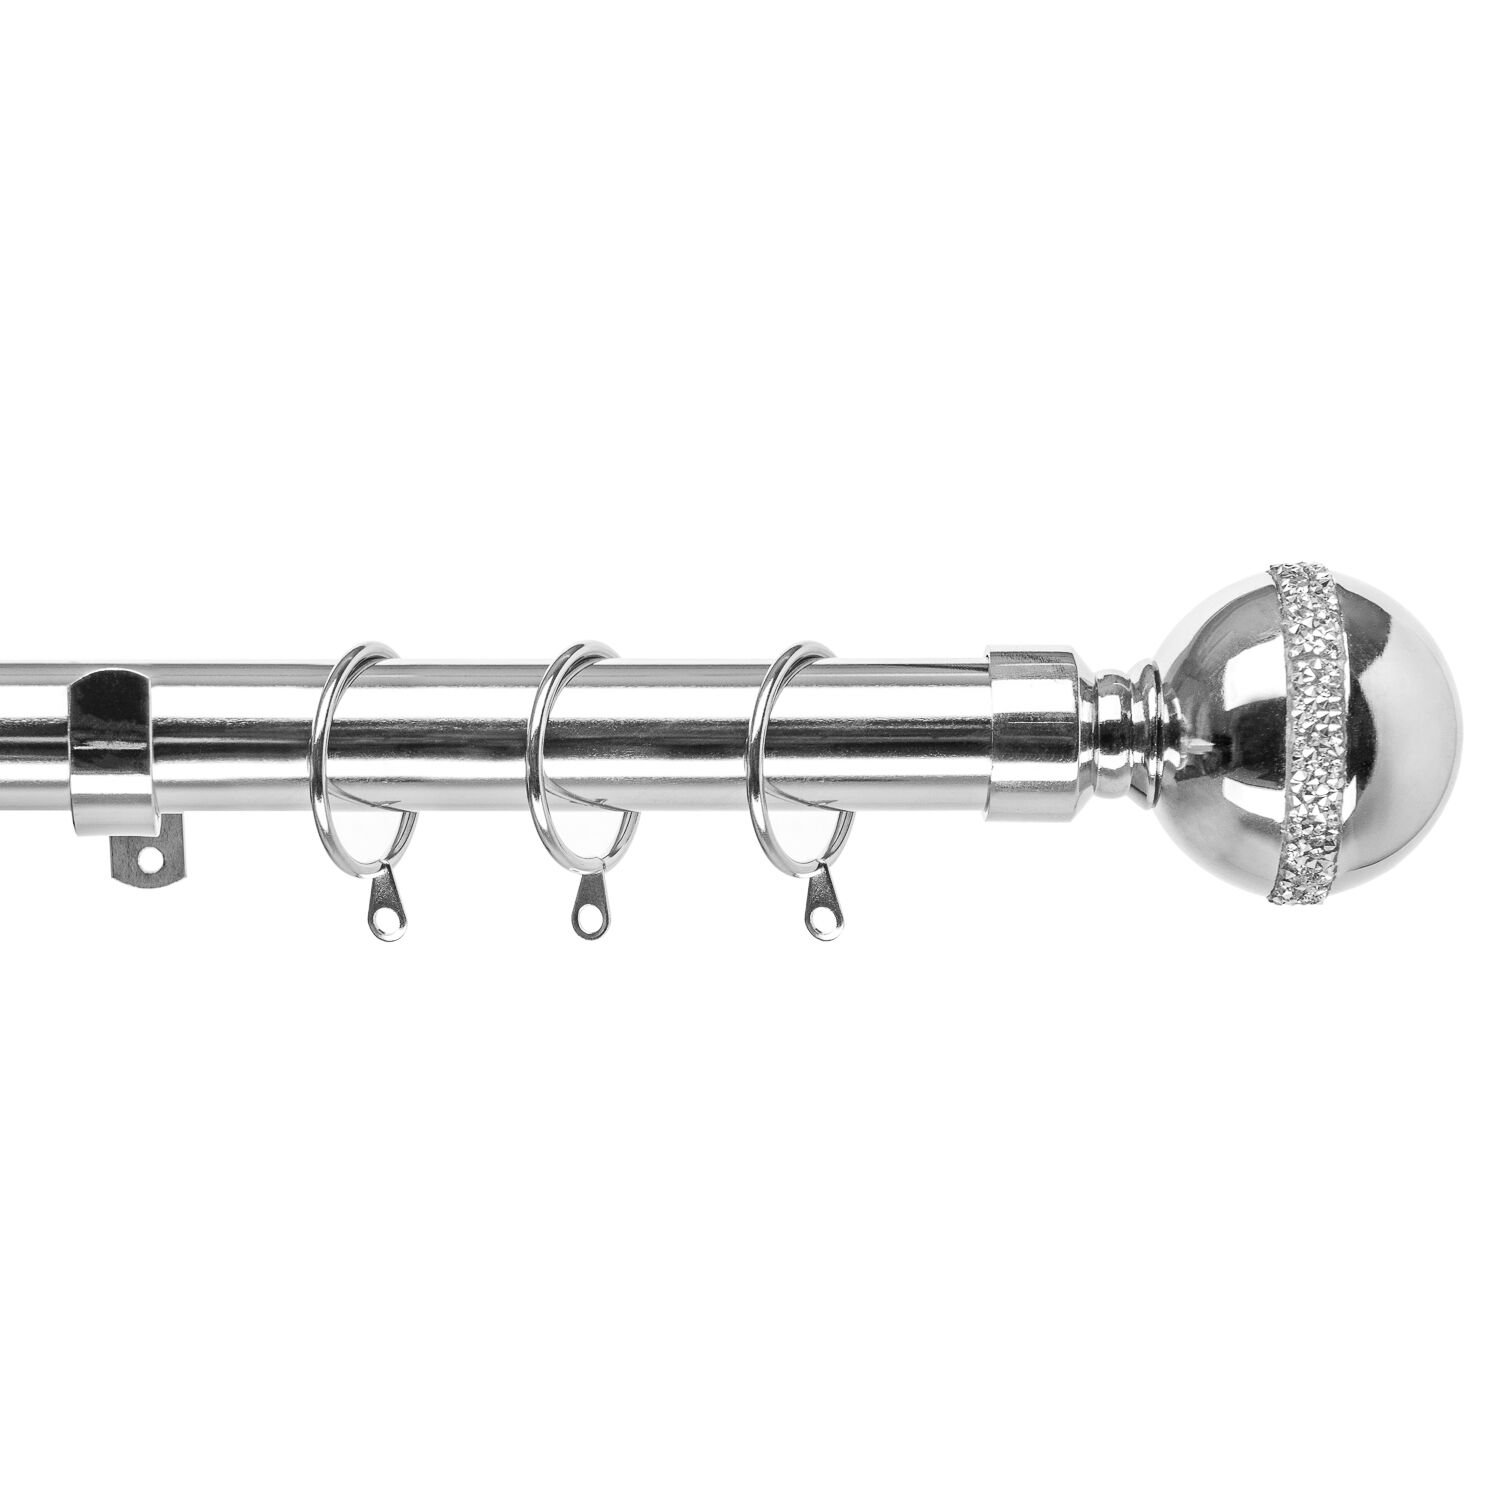 FINIALS FITTINGS & BRACKETS EXTENDABLE METAL CURTAIN POLE 28mm INCLUDES RINGS 